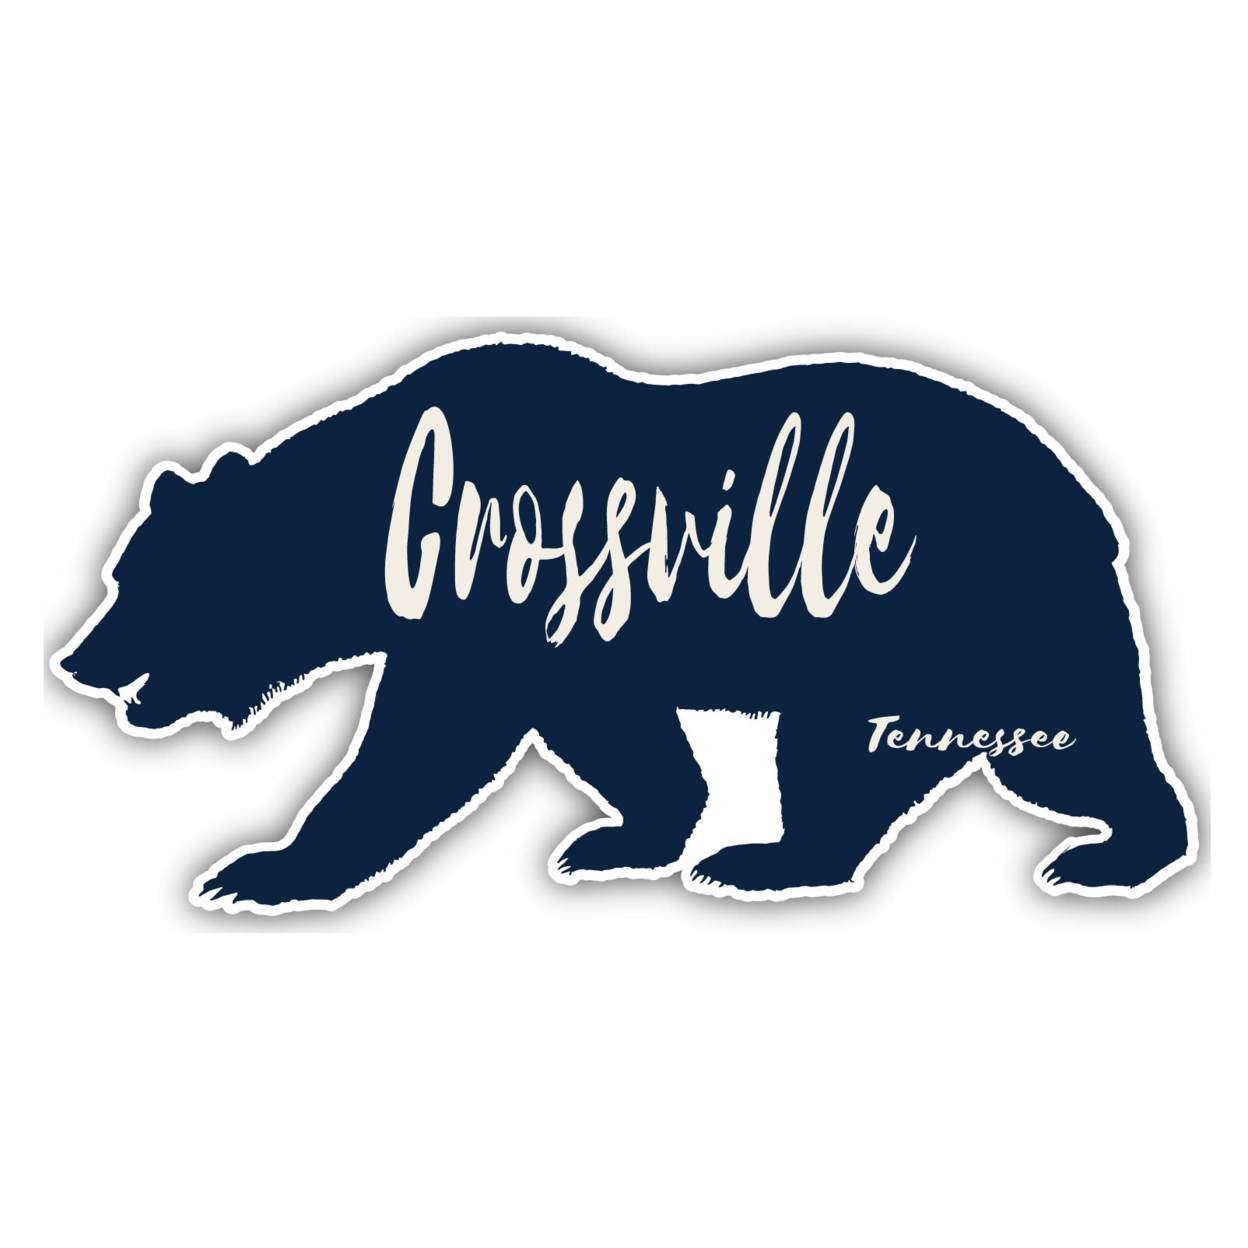 Crossville Tennessee Souvenir Decorative Stickers (Choose Theme And Size) - Single Unit, 8-Inch, Tent